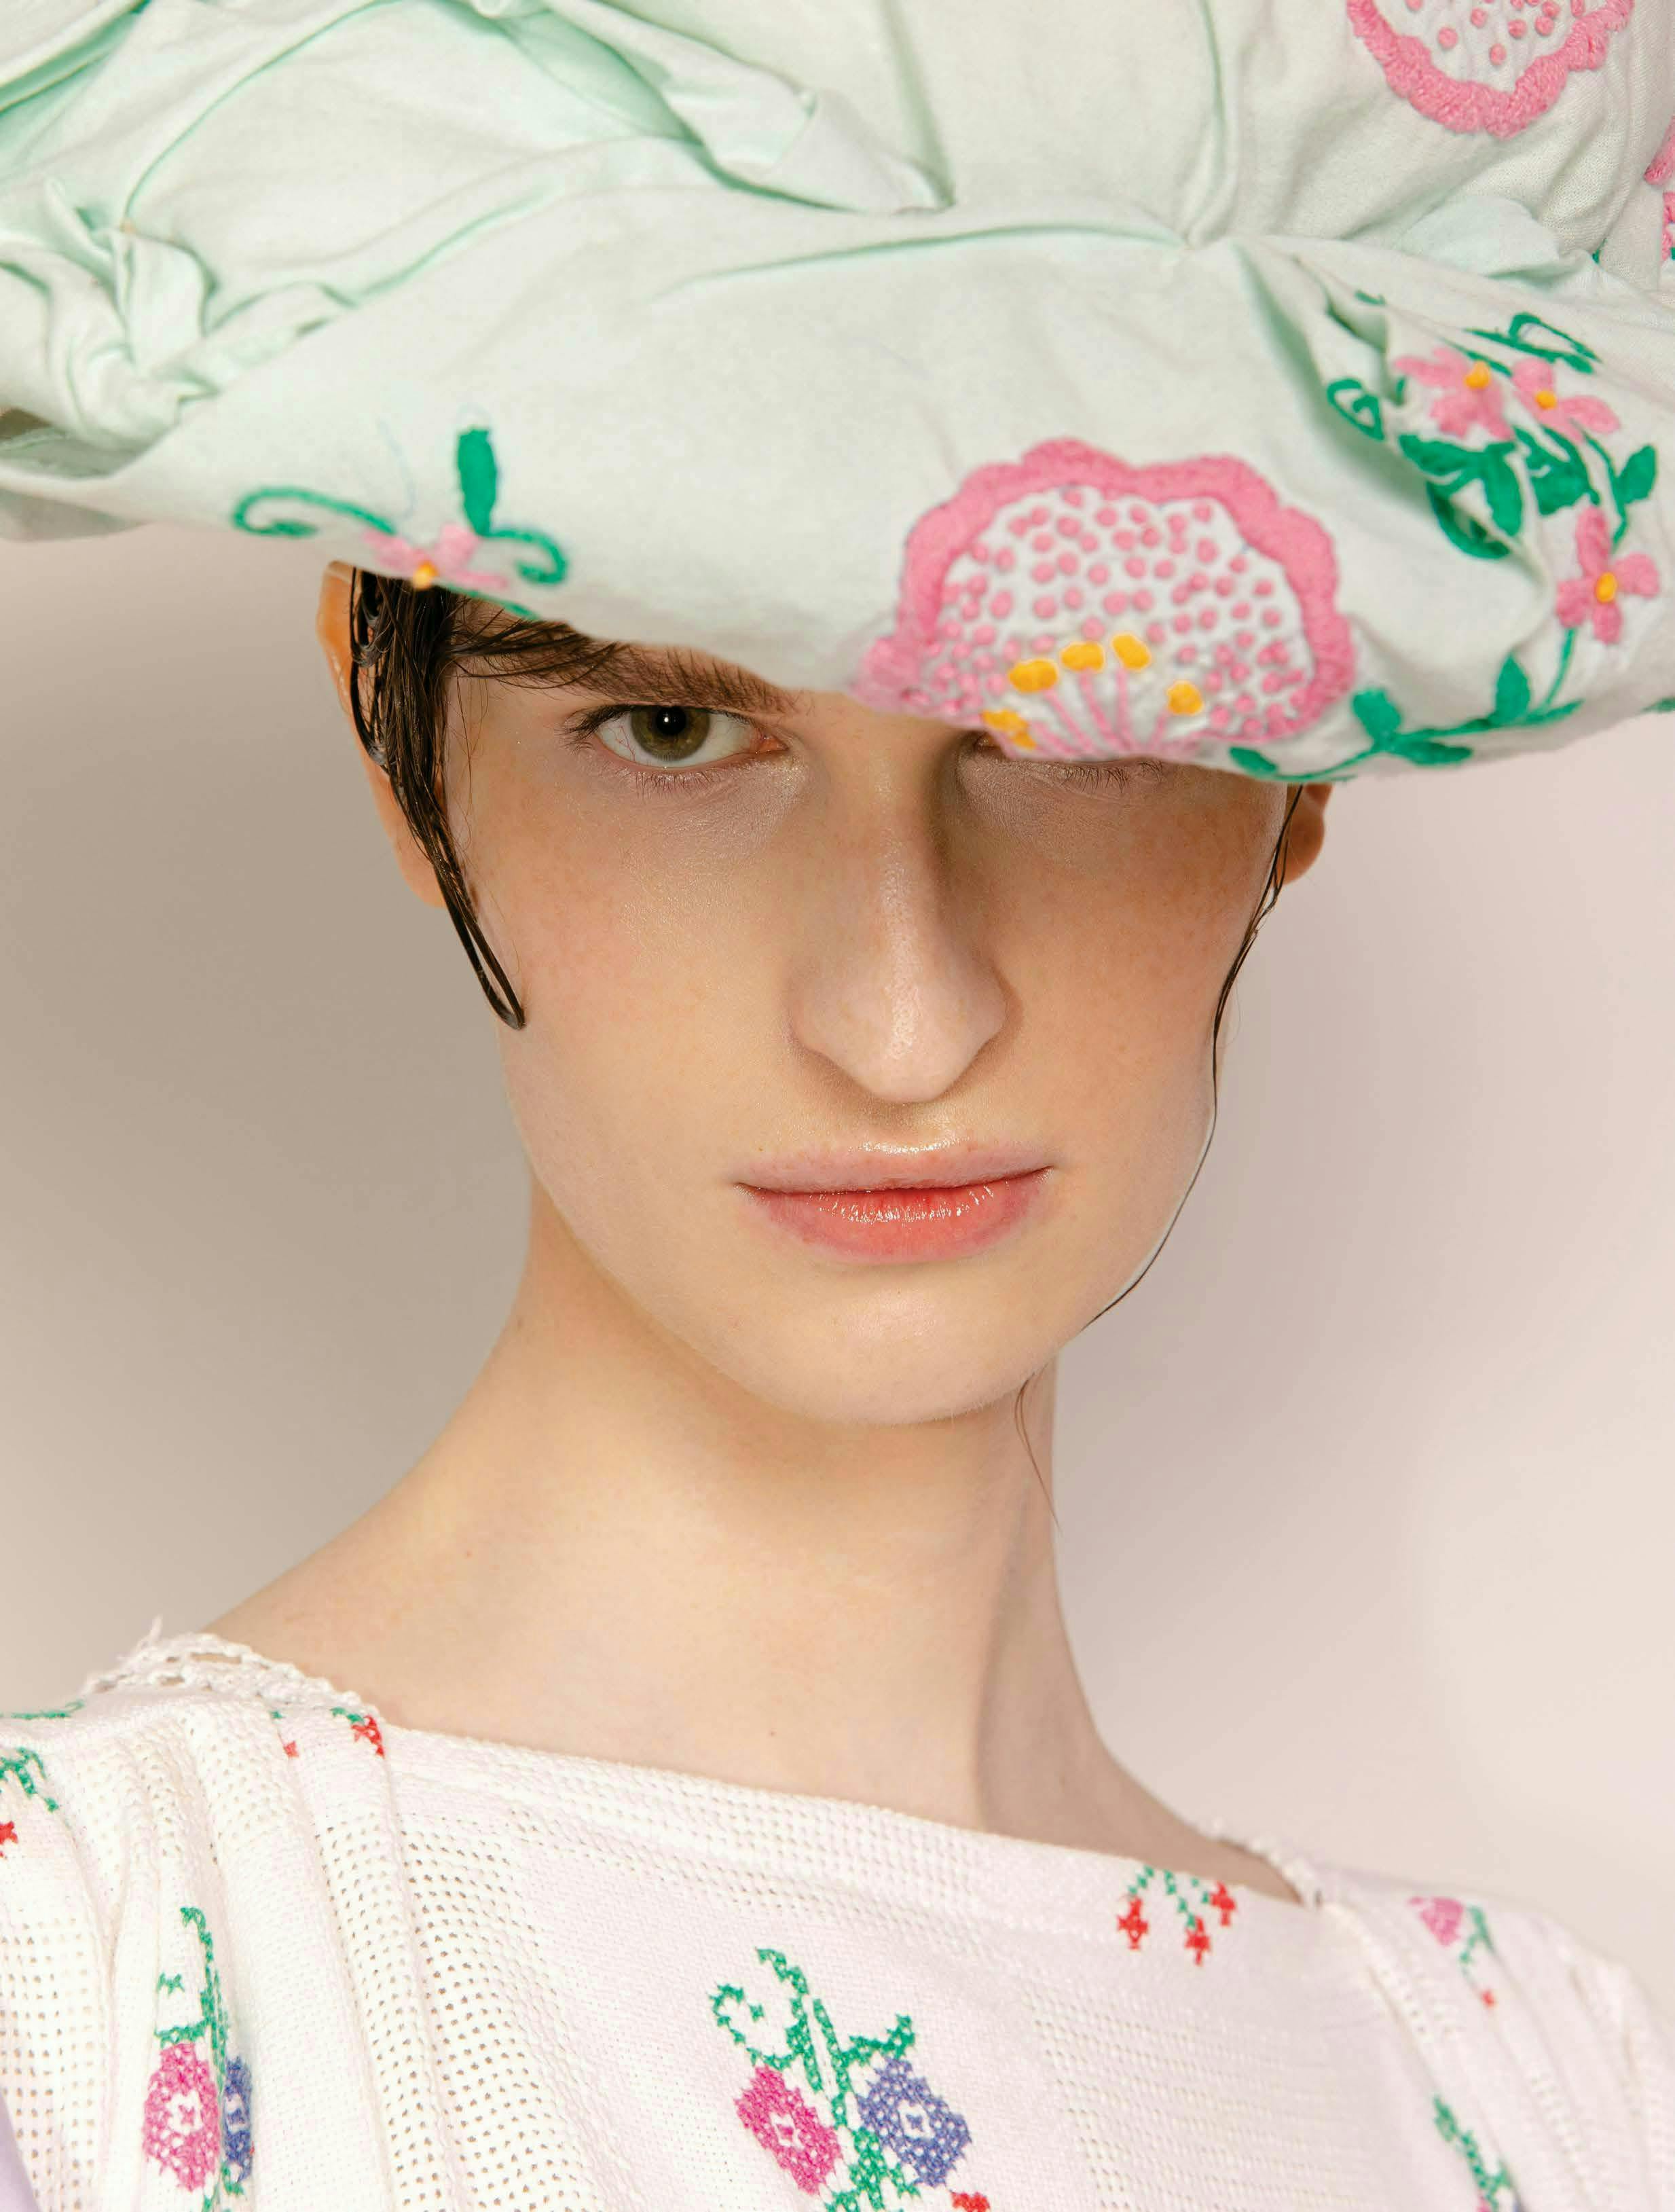 clothing apparel person human sun hat hat